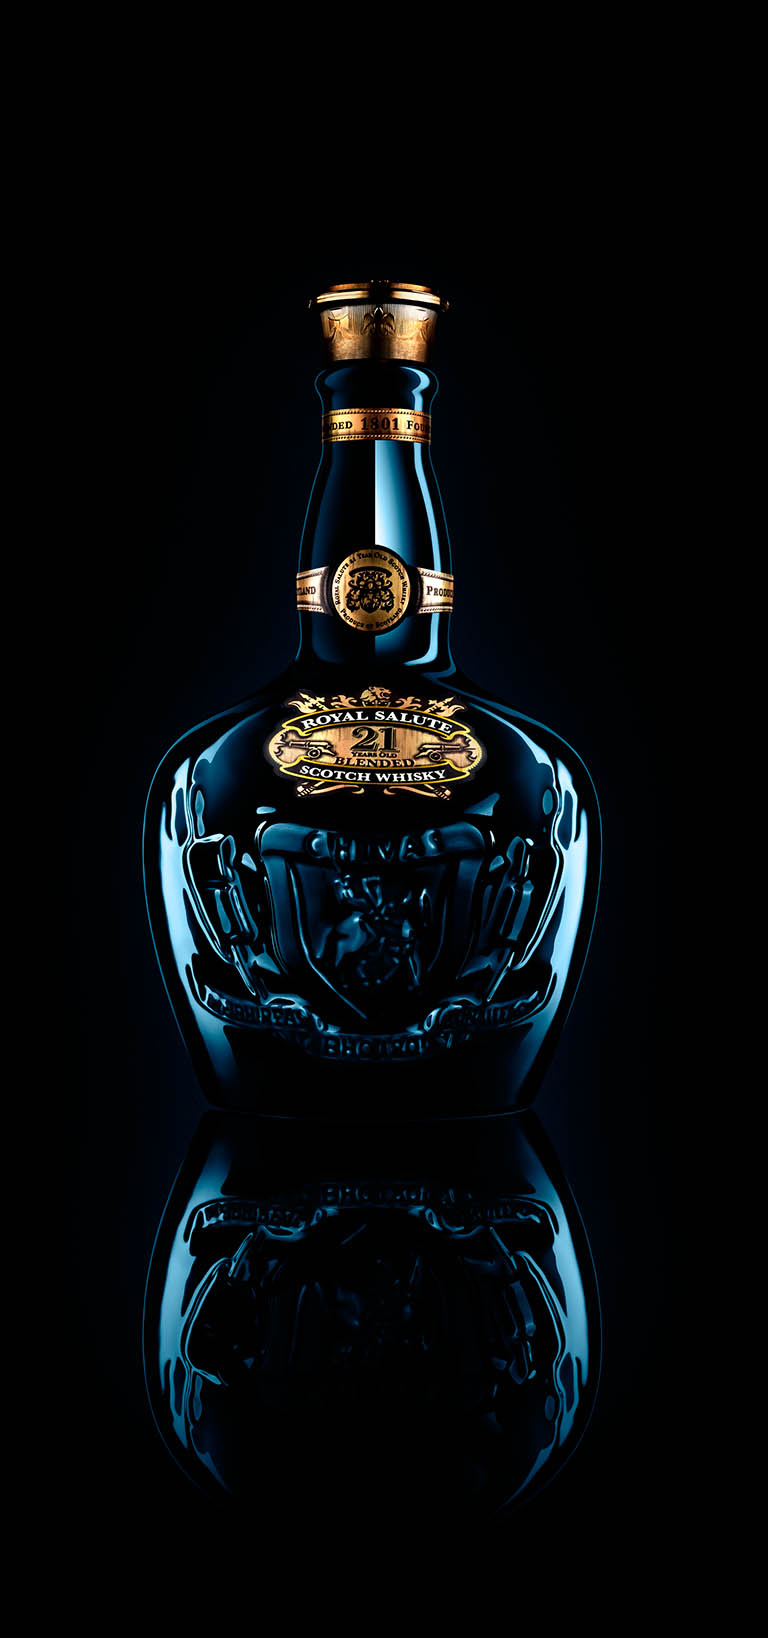 Drinks Photography of Chivas Royal Salute whisky bottle by Packshot Factory